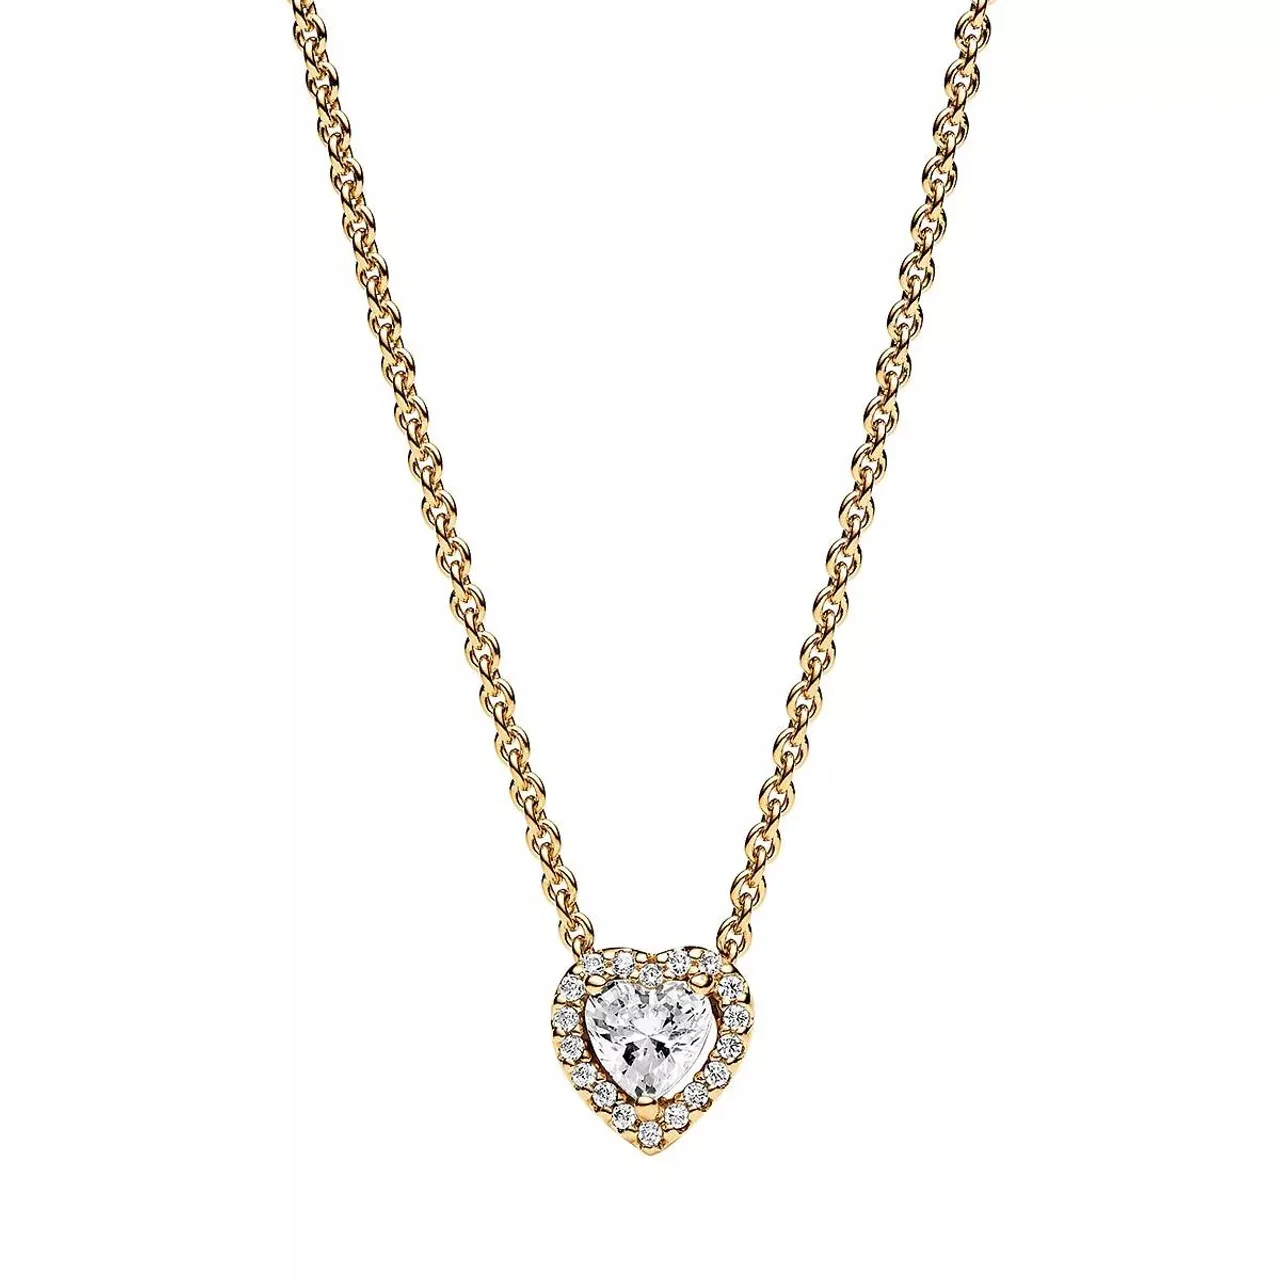 Pandora Necklaces - Heart 14k gold-plated collier with clear cubic zir - silver - Necklaces for ladies